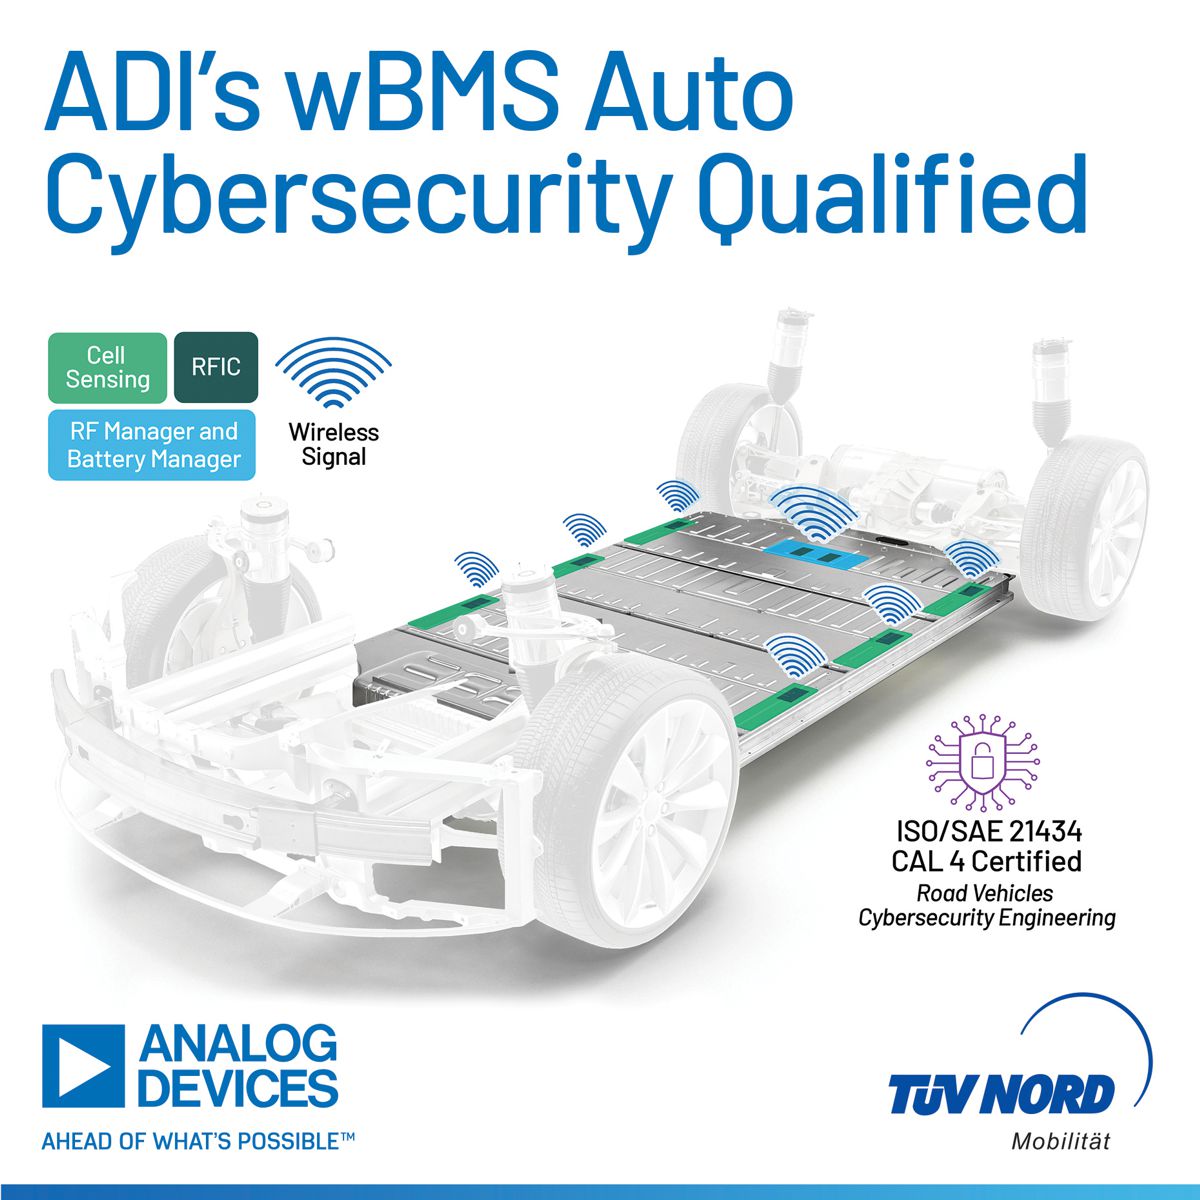 Analog Devices achieves Cybersecurity Qualification for Battery Management System